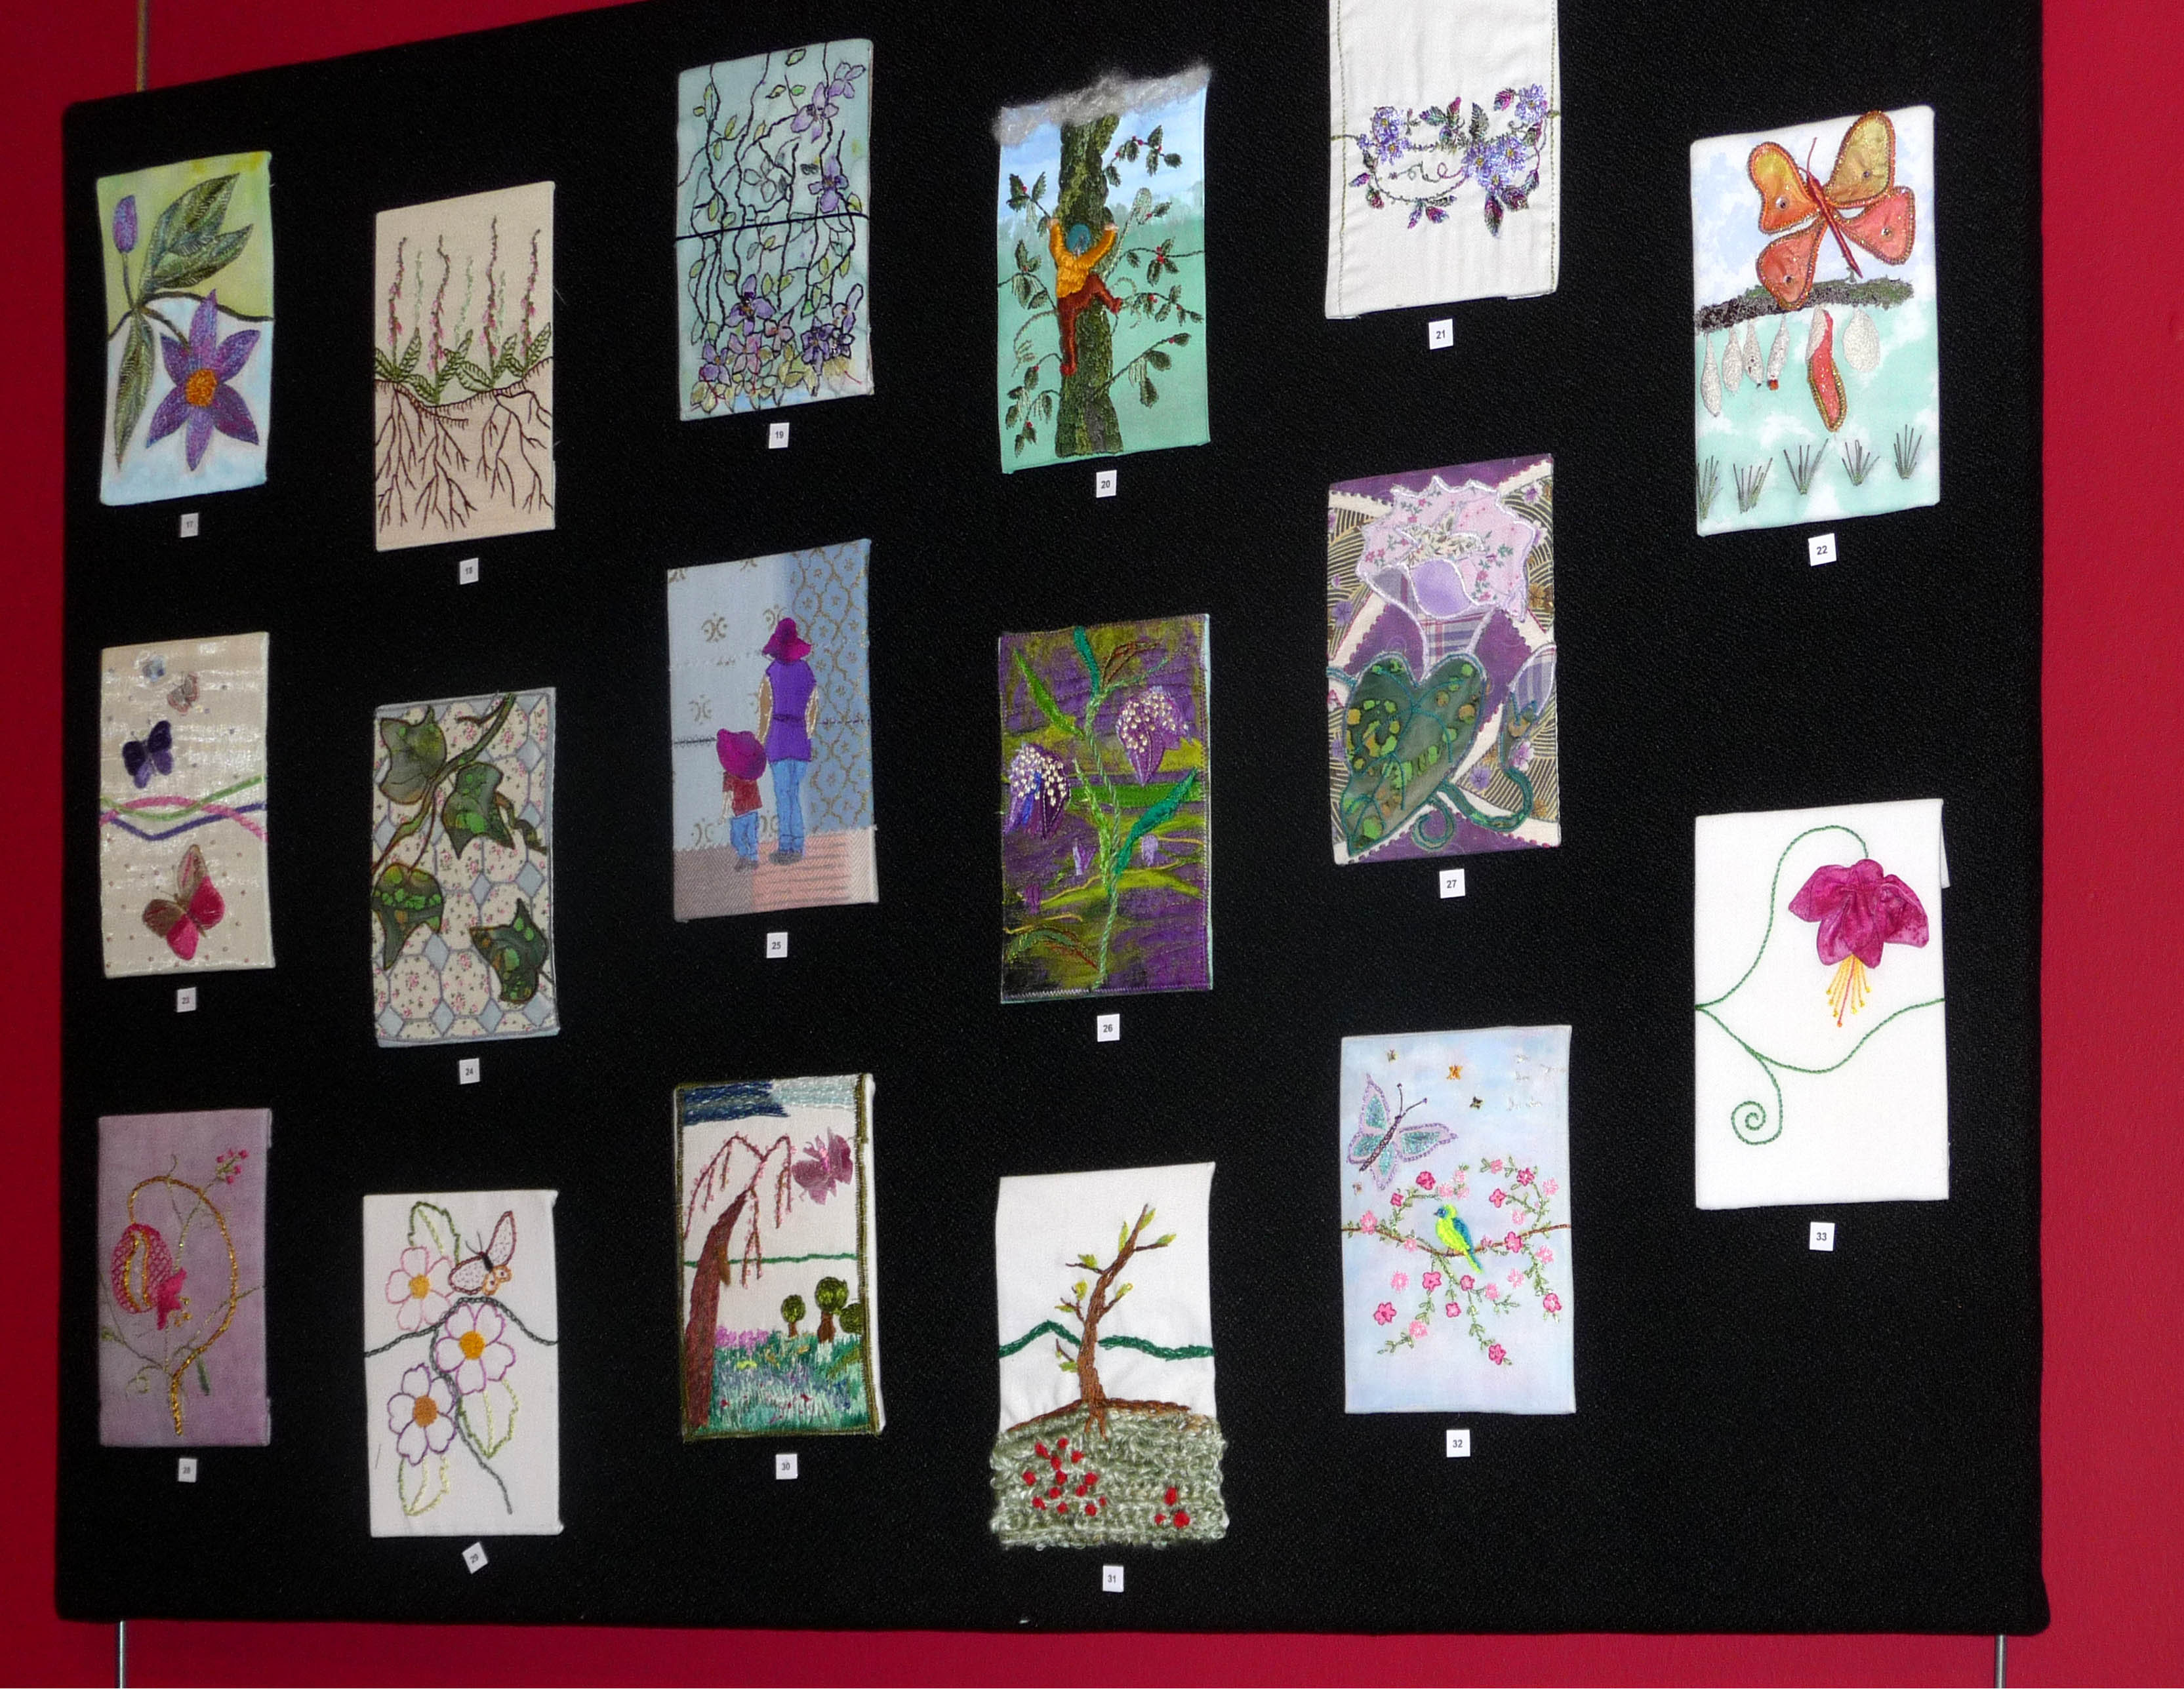 selection of postcards in GROWTH exhibition, Victoria Gallery, 2014